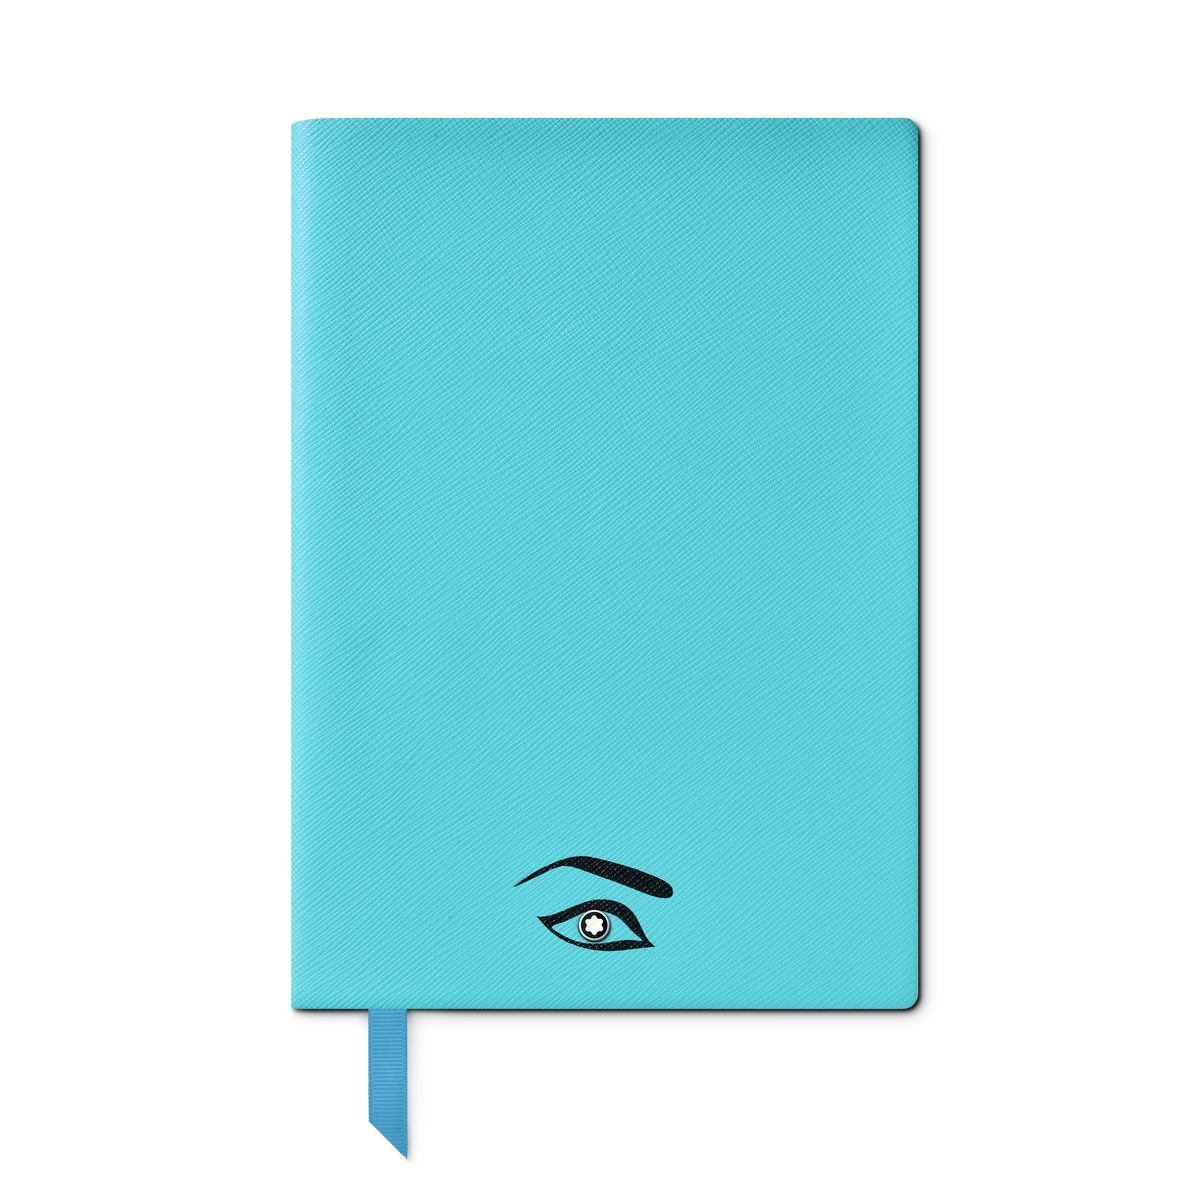 Notebook #146 small, Muses Maria Callas, blue lined